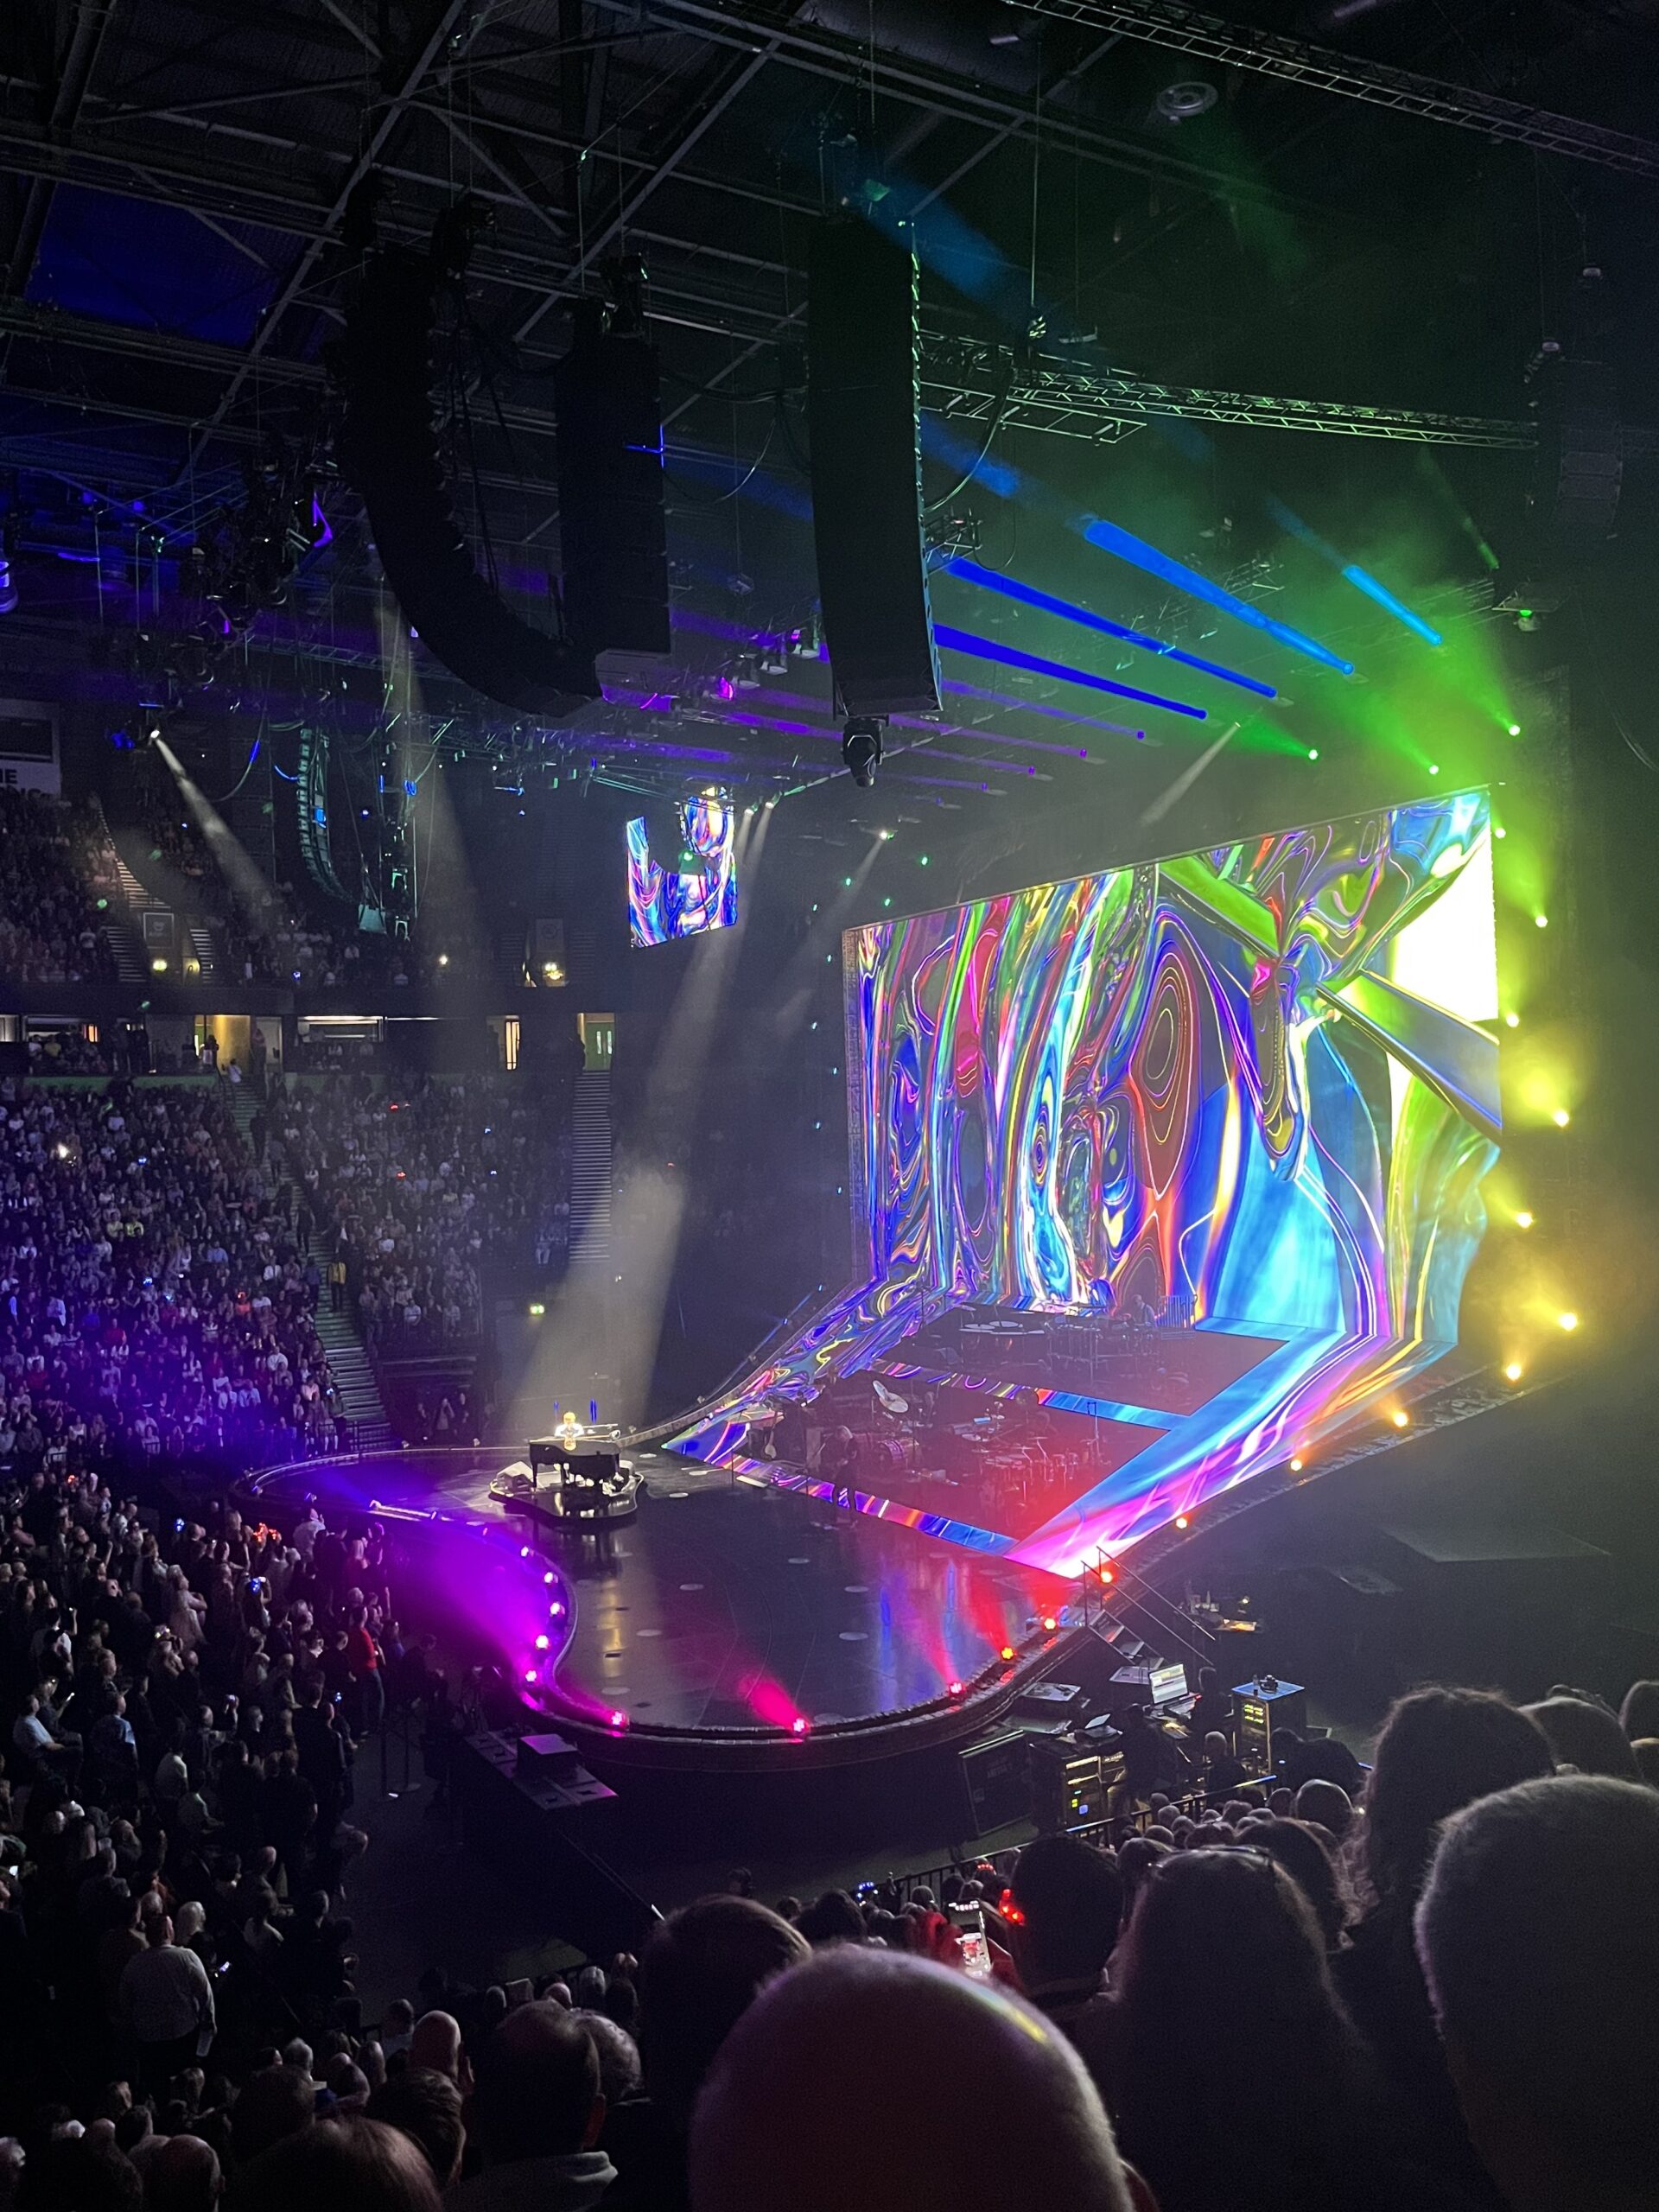 Elton John at the AO Arena in Manchester